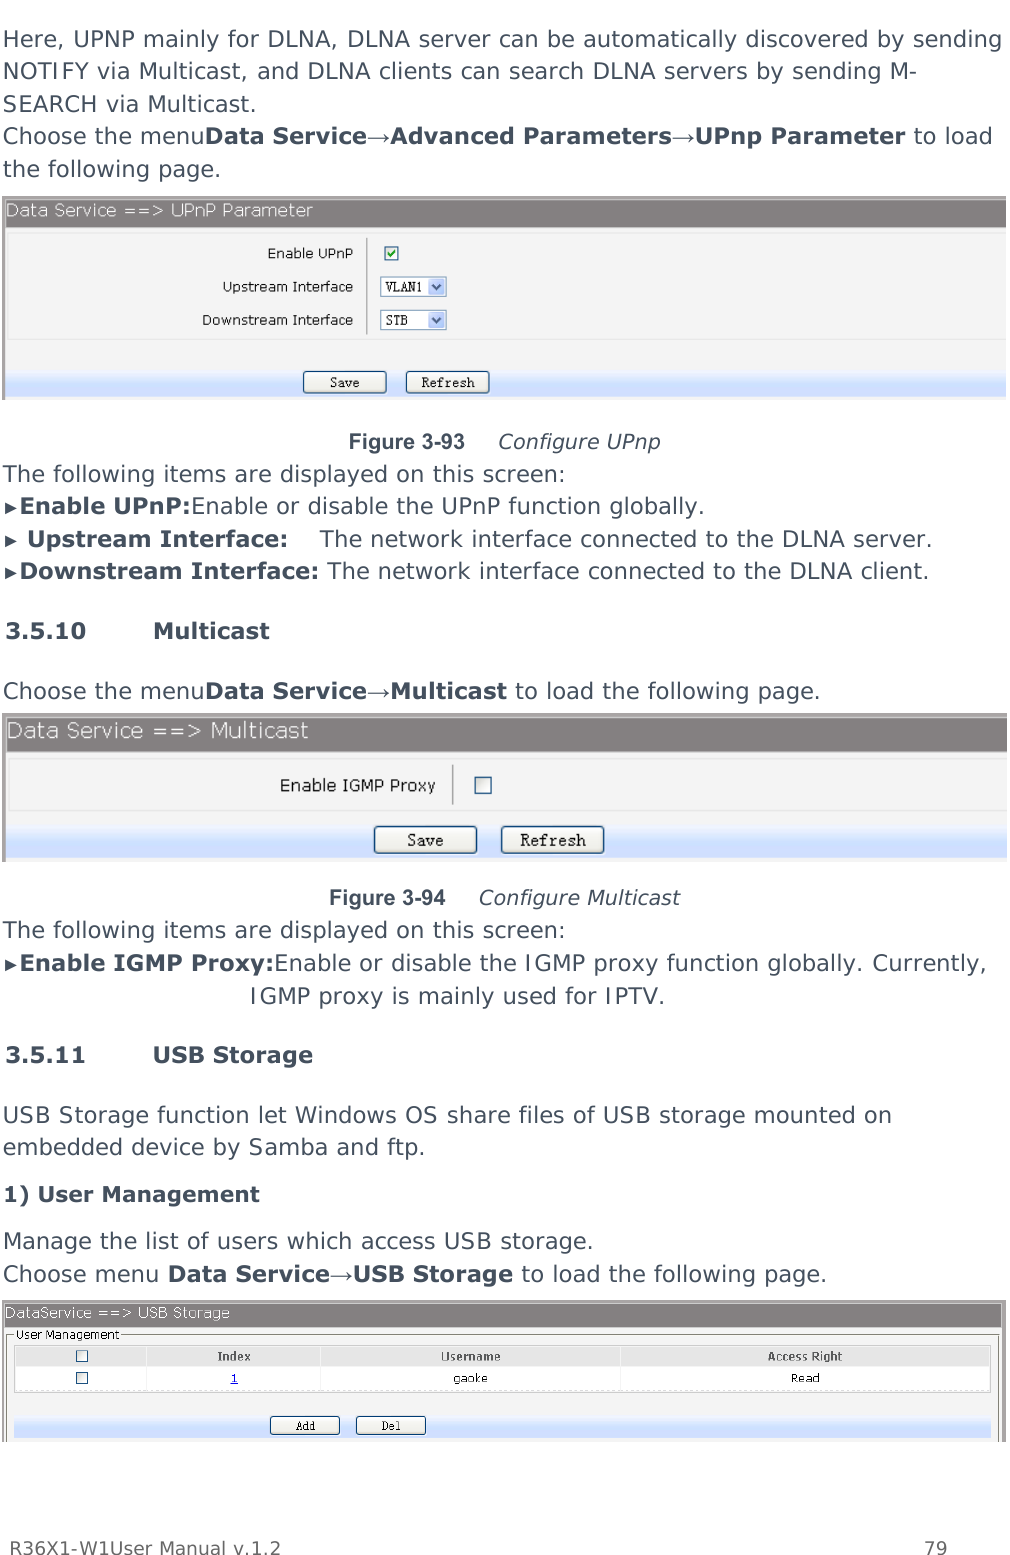           R36X1-W1User Manual v.1.2    79  Here, UPNP mainly for DLNA, DLNA server can be automatically discovered by sending NOTIFY via Multicast, and DLNA clients can search DLNA servers by sending M-SEARCH via Multicast. Choose the menuData Service→Advanced Parameters→UPnp Parameter to load the following page.  Figure 3-93  Configure UPnp The following items are displayed on this screen: ►Enable UPnP:Enable or disable the UPnP function globally. ► Upstream Interface:    The network interface connected to the DLNA server. ►Downstream Interface: The network interface connected to the DLNA client. 3.5.10 Multicast Choose the menuData Service→Multicast to load the following page.  Figure 3-94  Configure Multicast The following items are displayed on this screen: ►Enable IGMP Proxy:Enable or disable the IGMP proxy function globally. Currently, IGMP proxy is mainly used for IPTV. 3.5.11 USB Storage USB Storage function let Windows OS share files of USB storage mounted on embedded device by Samba and ftp. 1) User Management Manage the list of users which access USB storage. Choose menu Data Service→USB Storage to load the following page.  